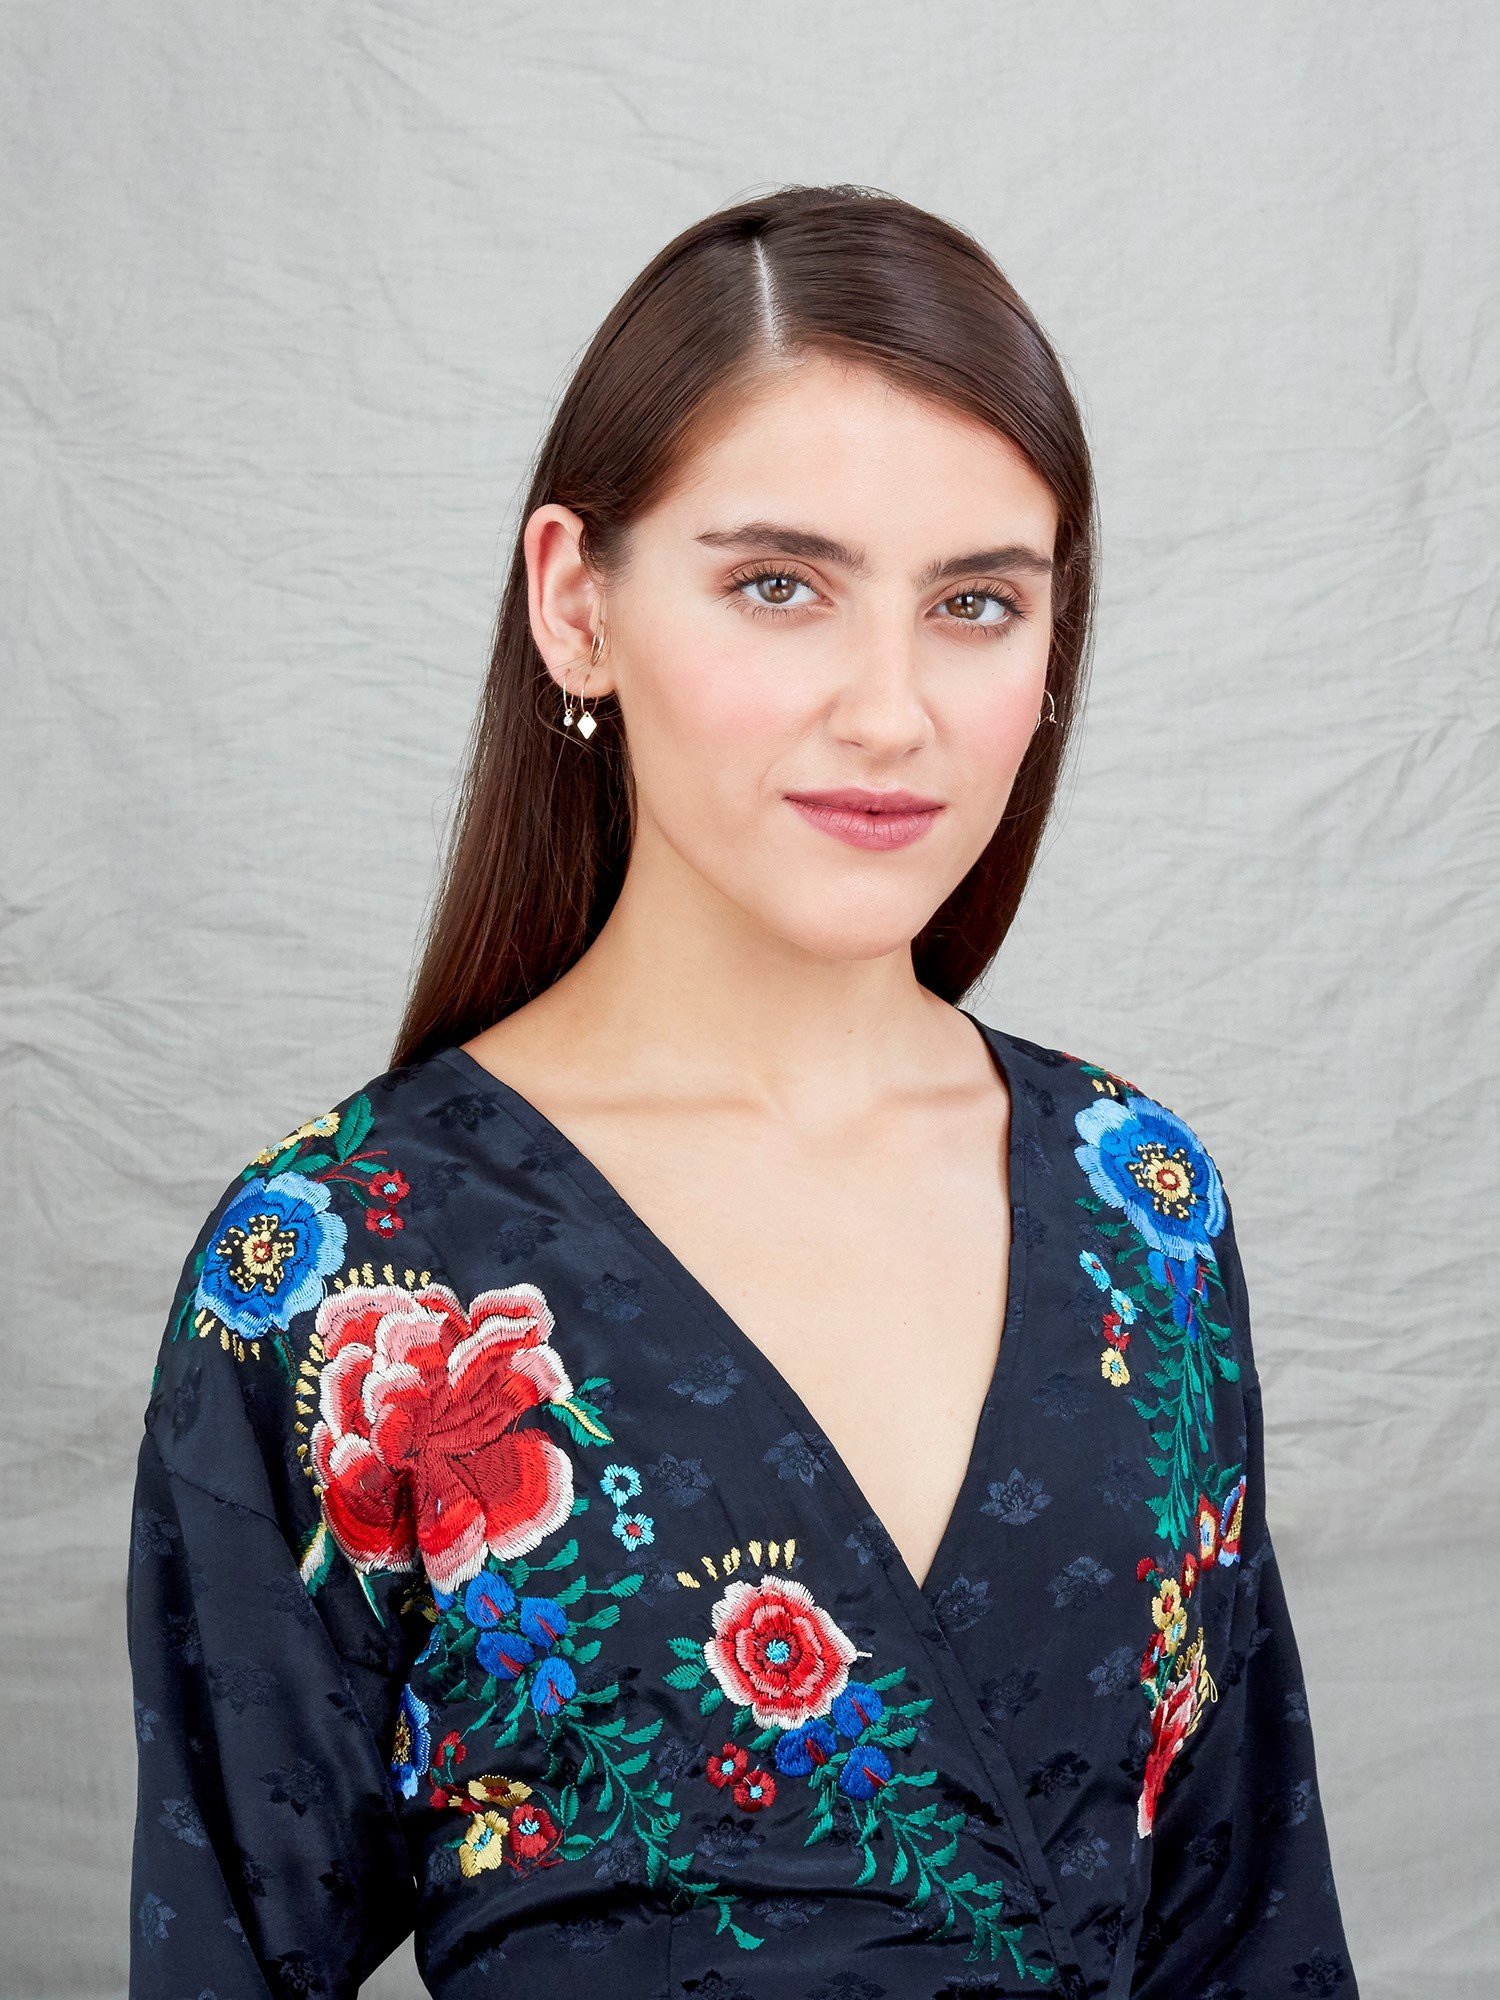 How to style long hair: Studio image of a brunette model with long straight hair styled in a sleek side parting, wearing a floral top